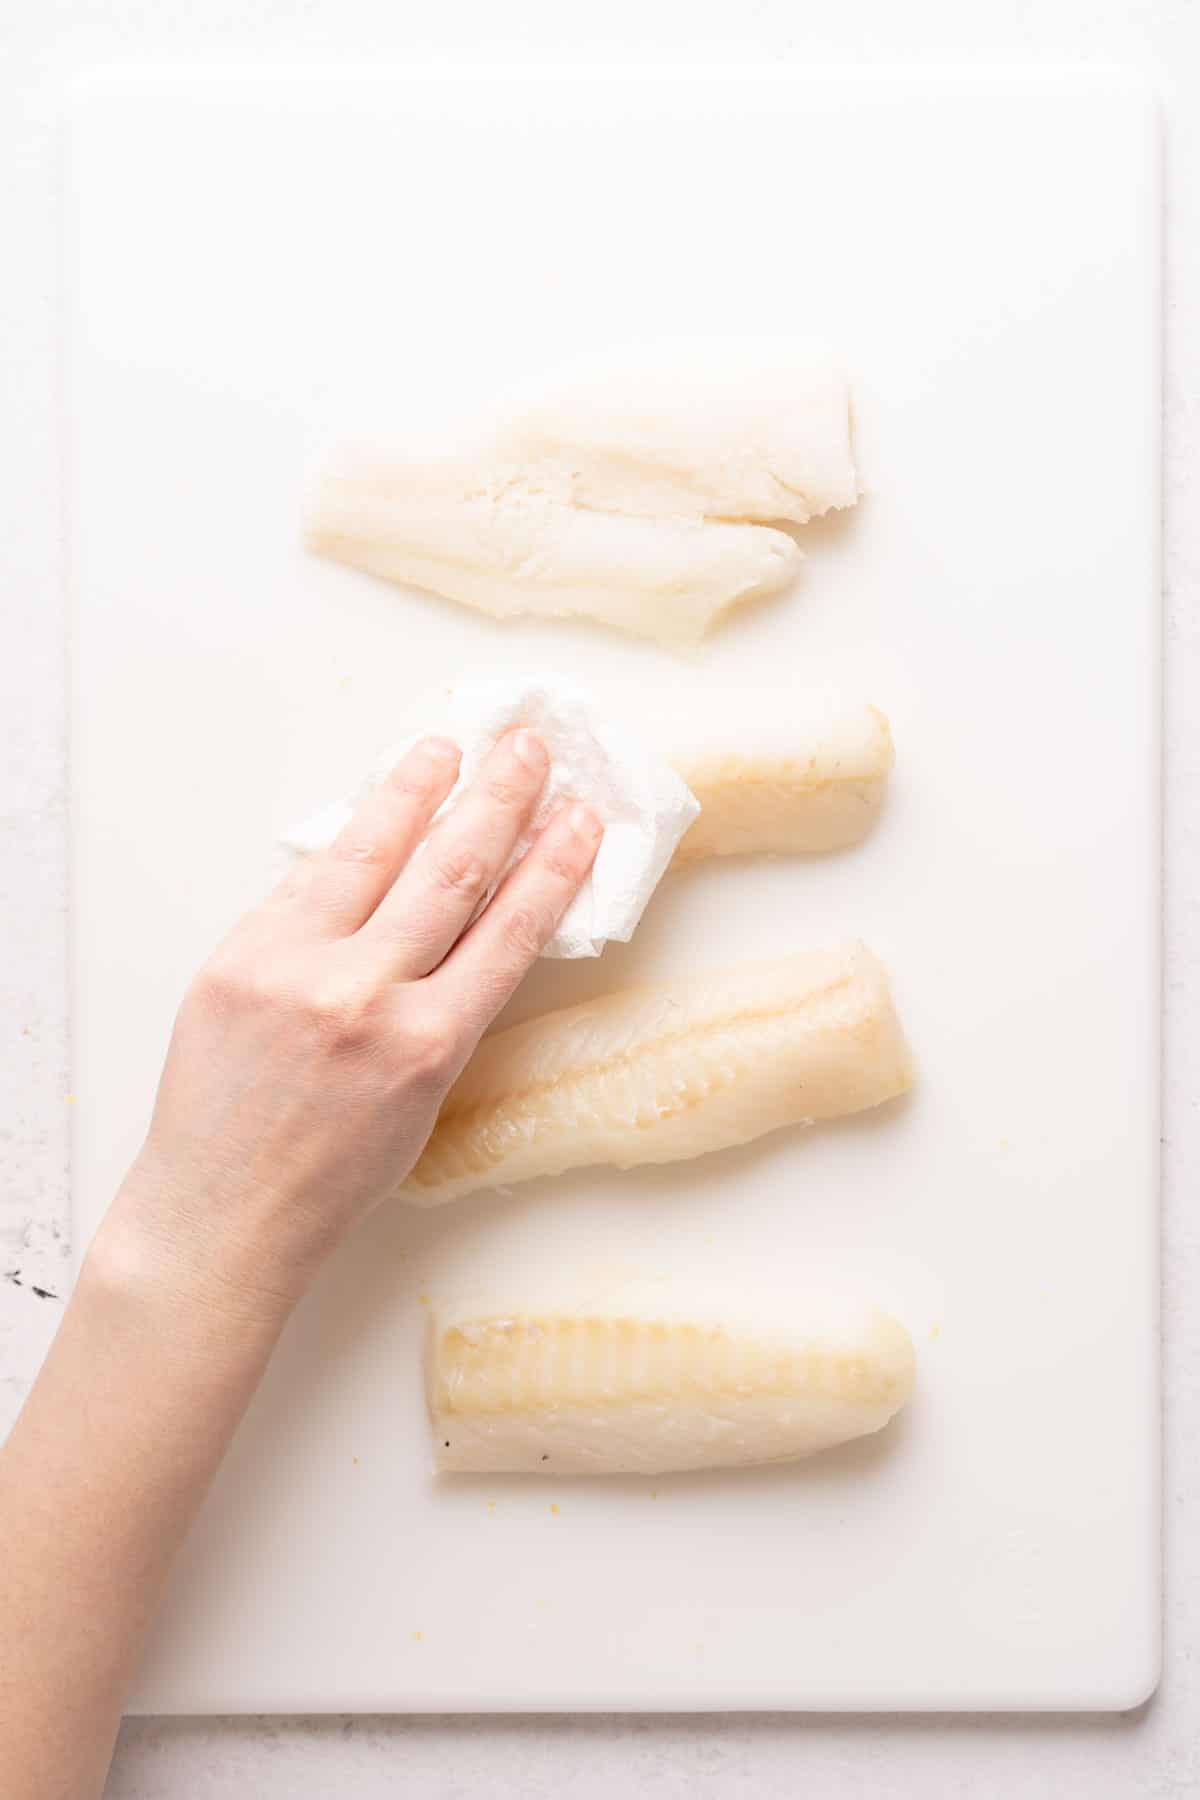 cod pieces being patted with paper towel.